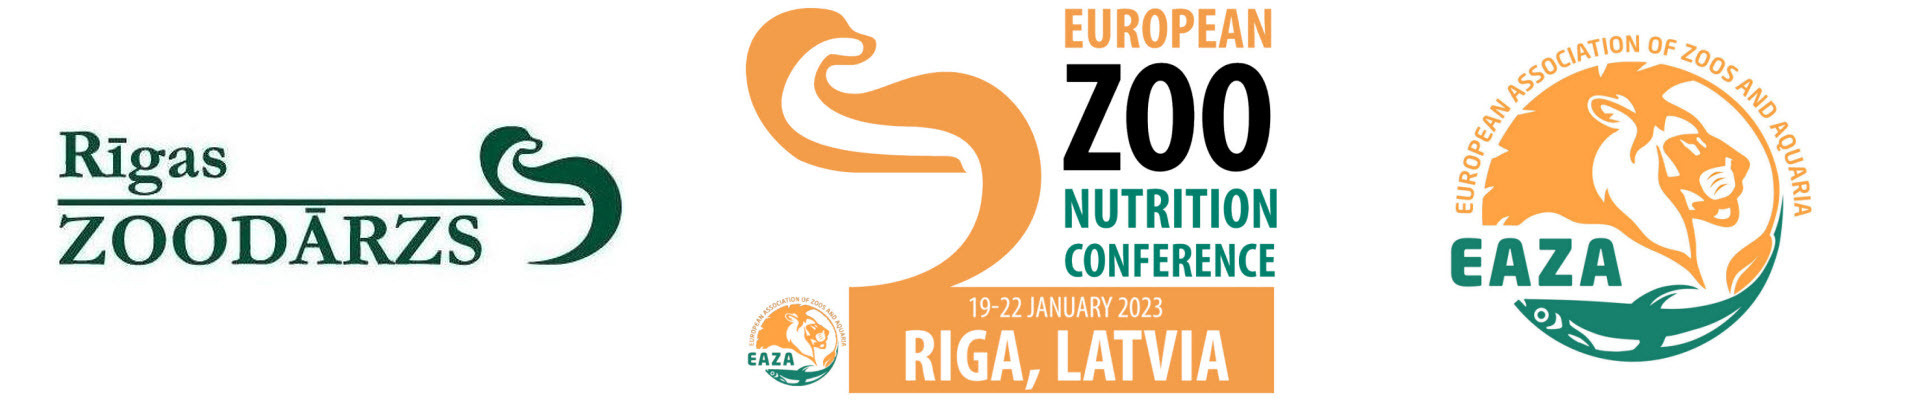 European Zoo Nutrition Conference 2023